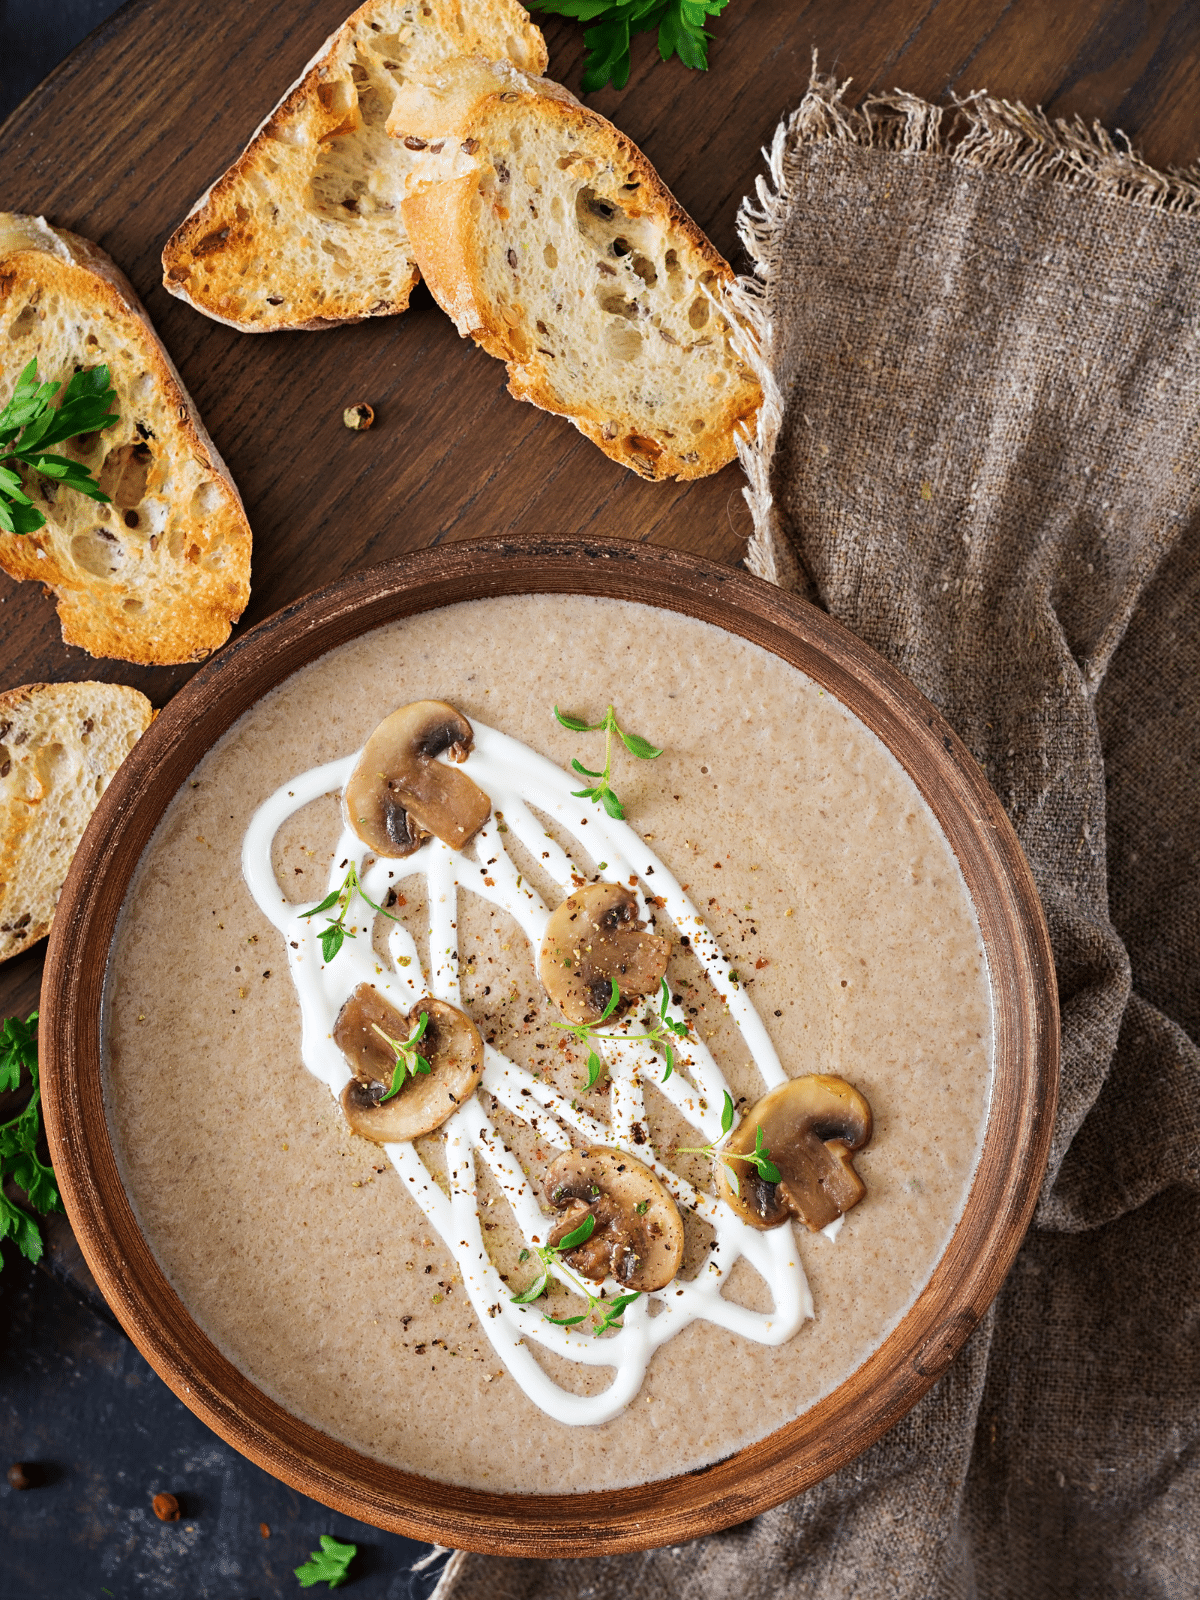 A bowl of cream of mushroom soup on a wooden table, Toasted sliced bread on the side.